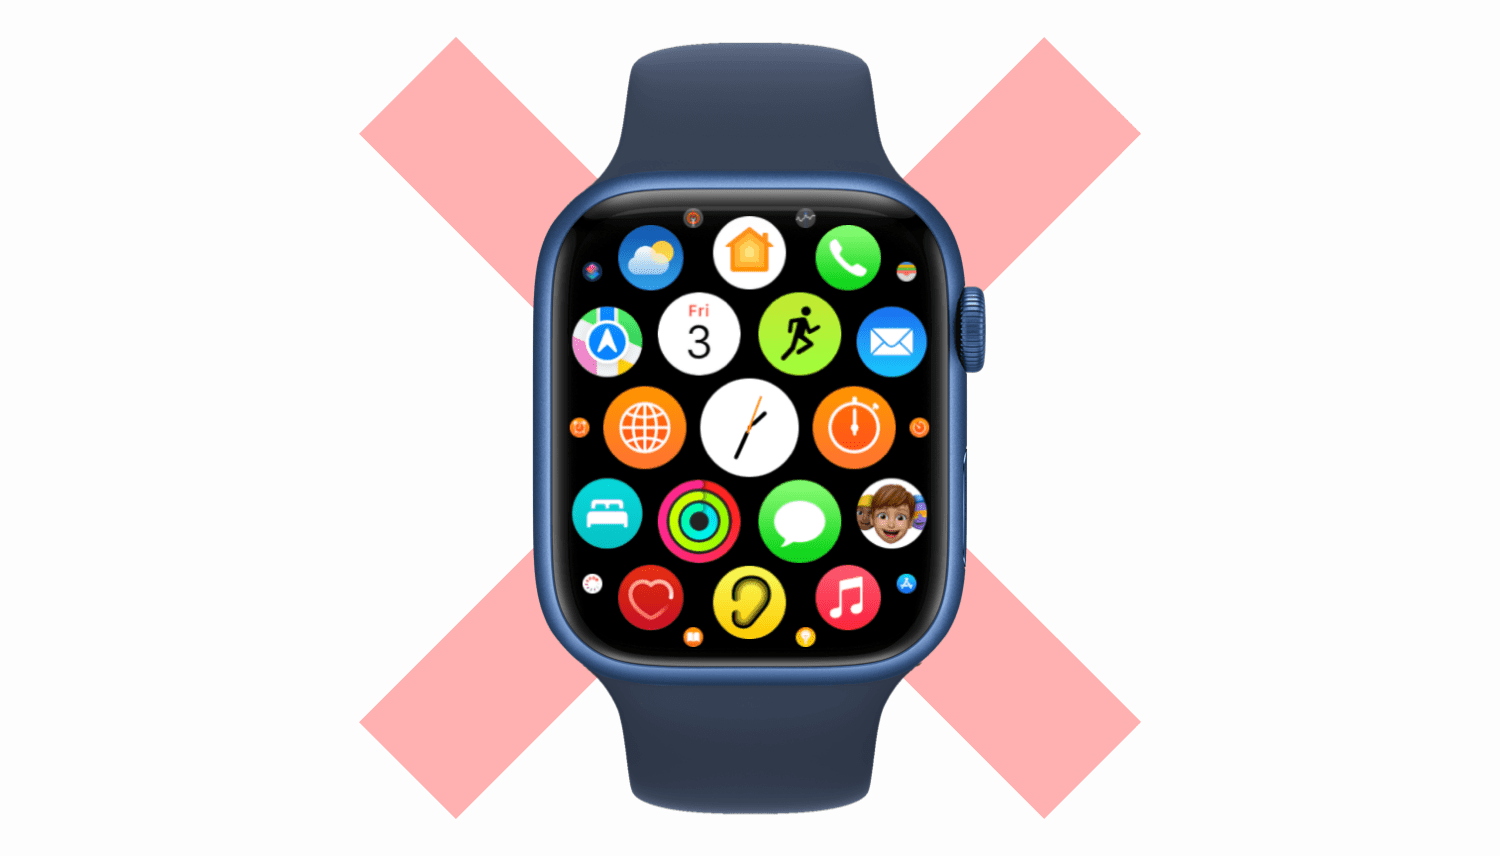 Apple Watch with many apps on a light gray background with faint red cross